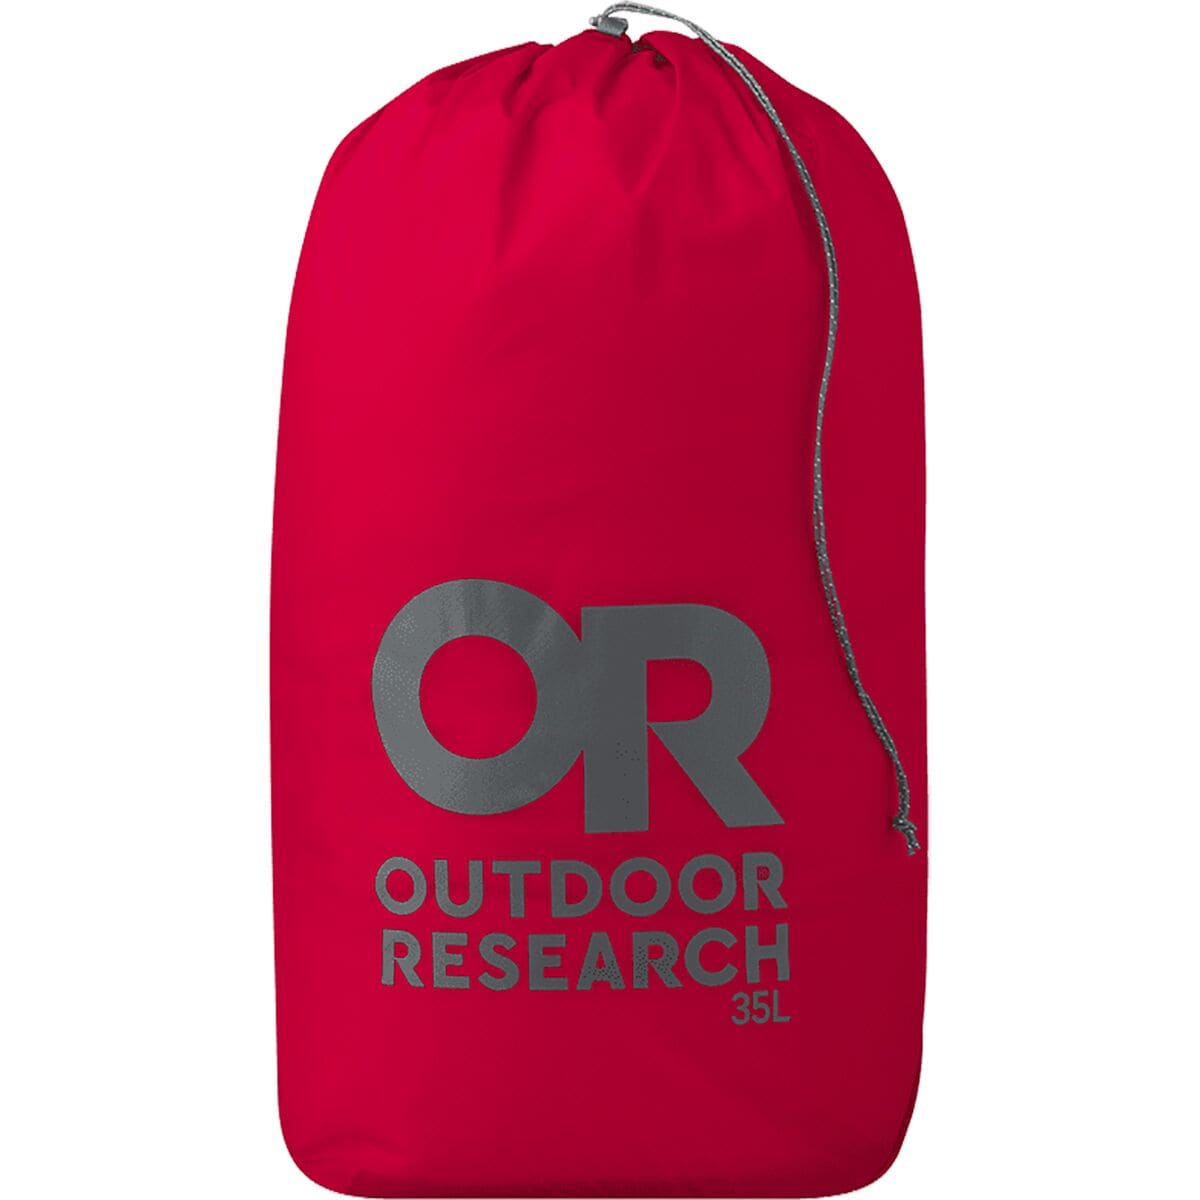 Outdoor Research PackOut Ultralight 35L Stuff Sack - Hike & Camp